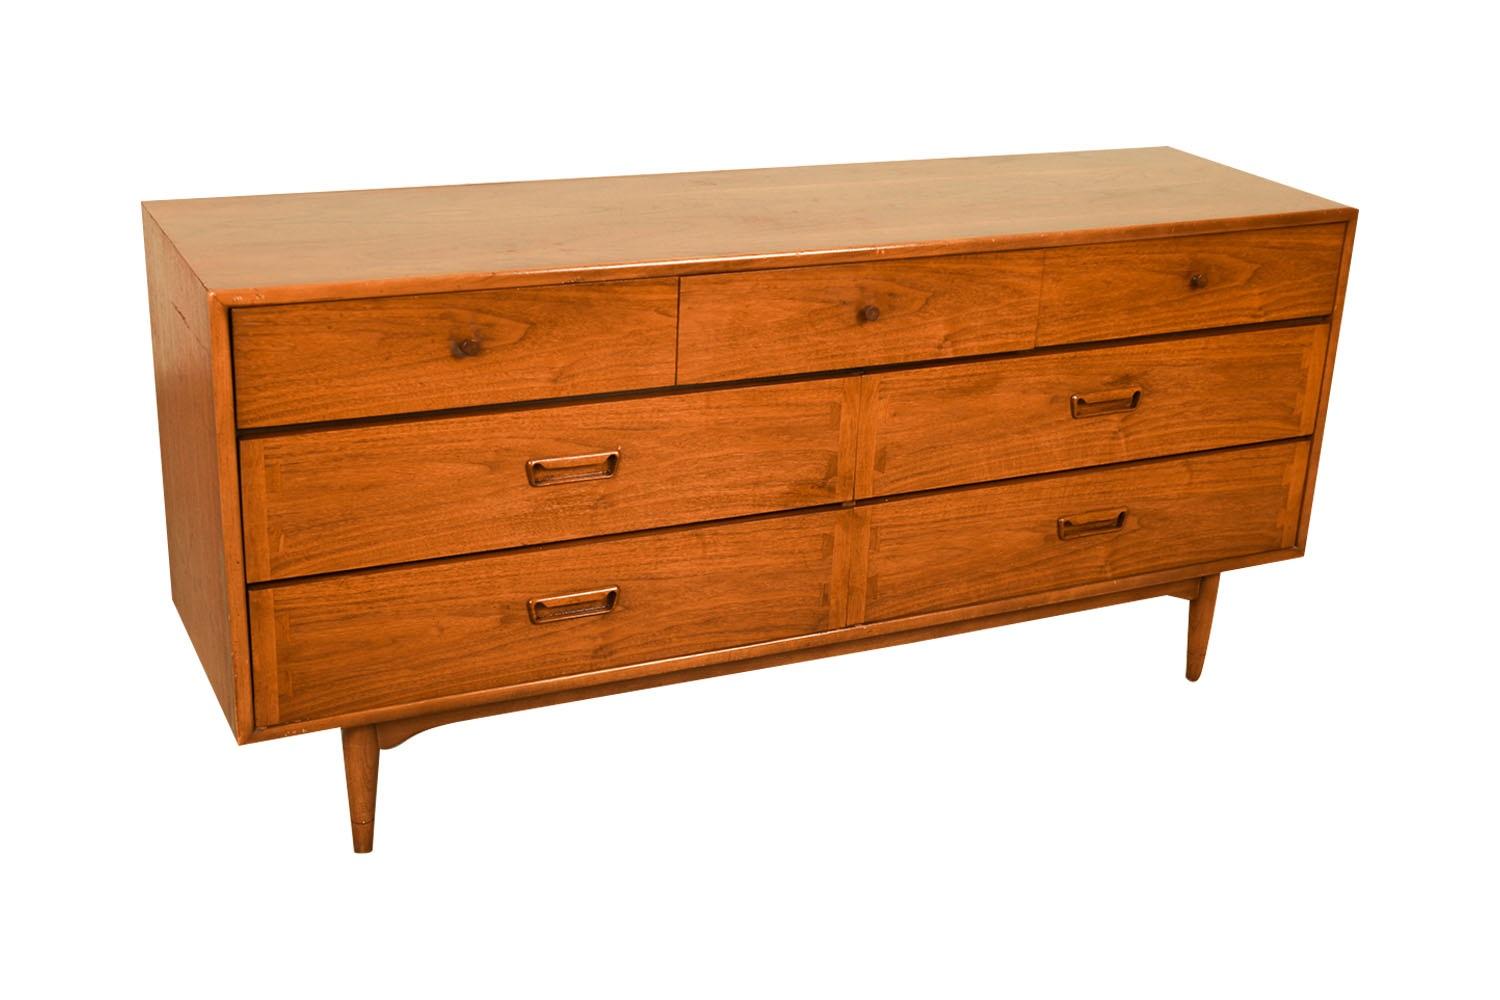 An elegant Mid Century Modern Lane Acclaim 7-Drawer Dresser c. 1960s. This is a beautiful example of Mid-Century craftsmanship by Lane Furniture. This beautiful dresser is a difficult hard to find style.  An extremely well made and solid piece in